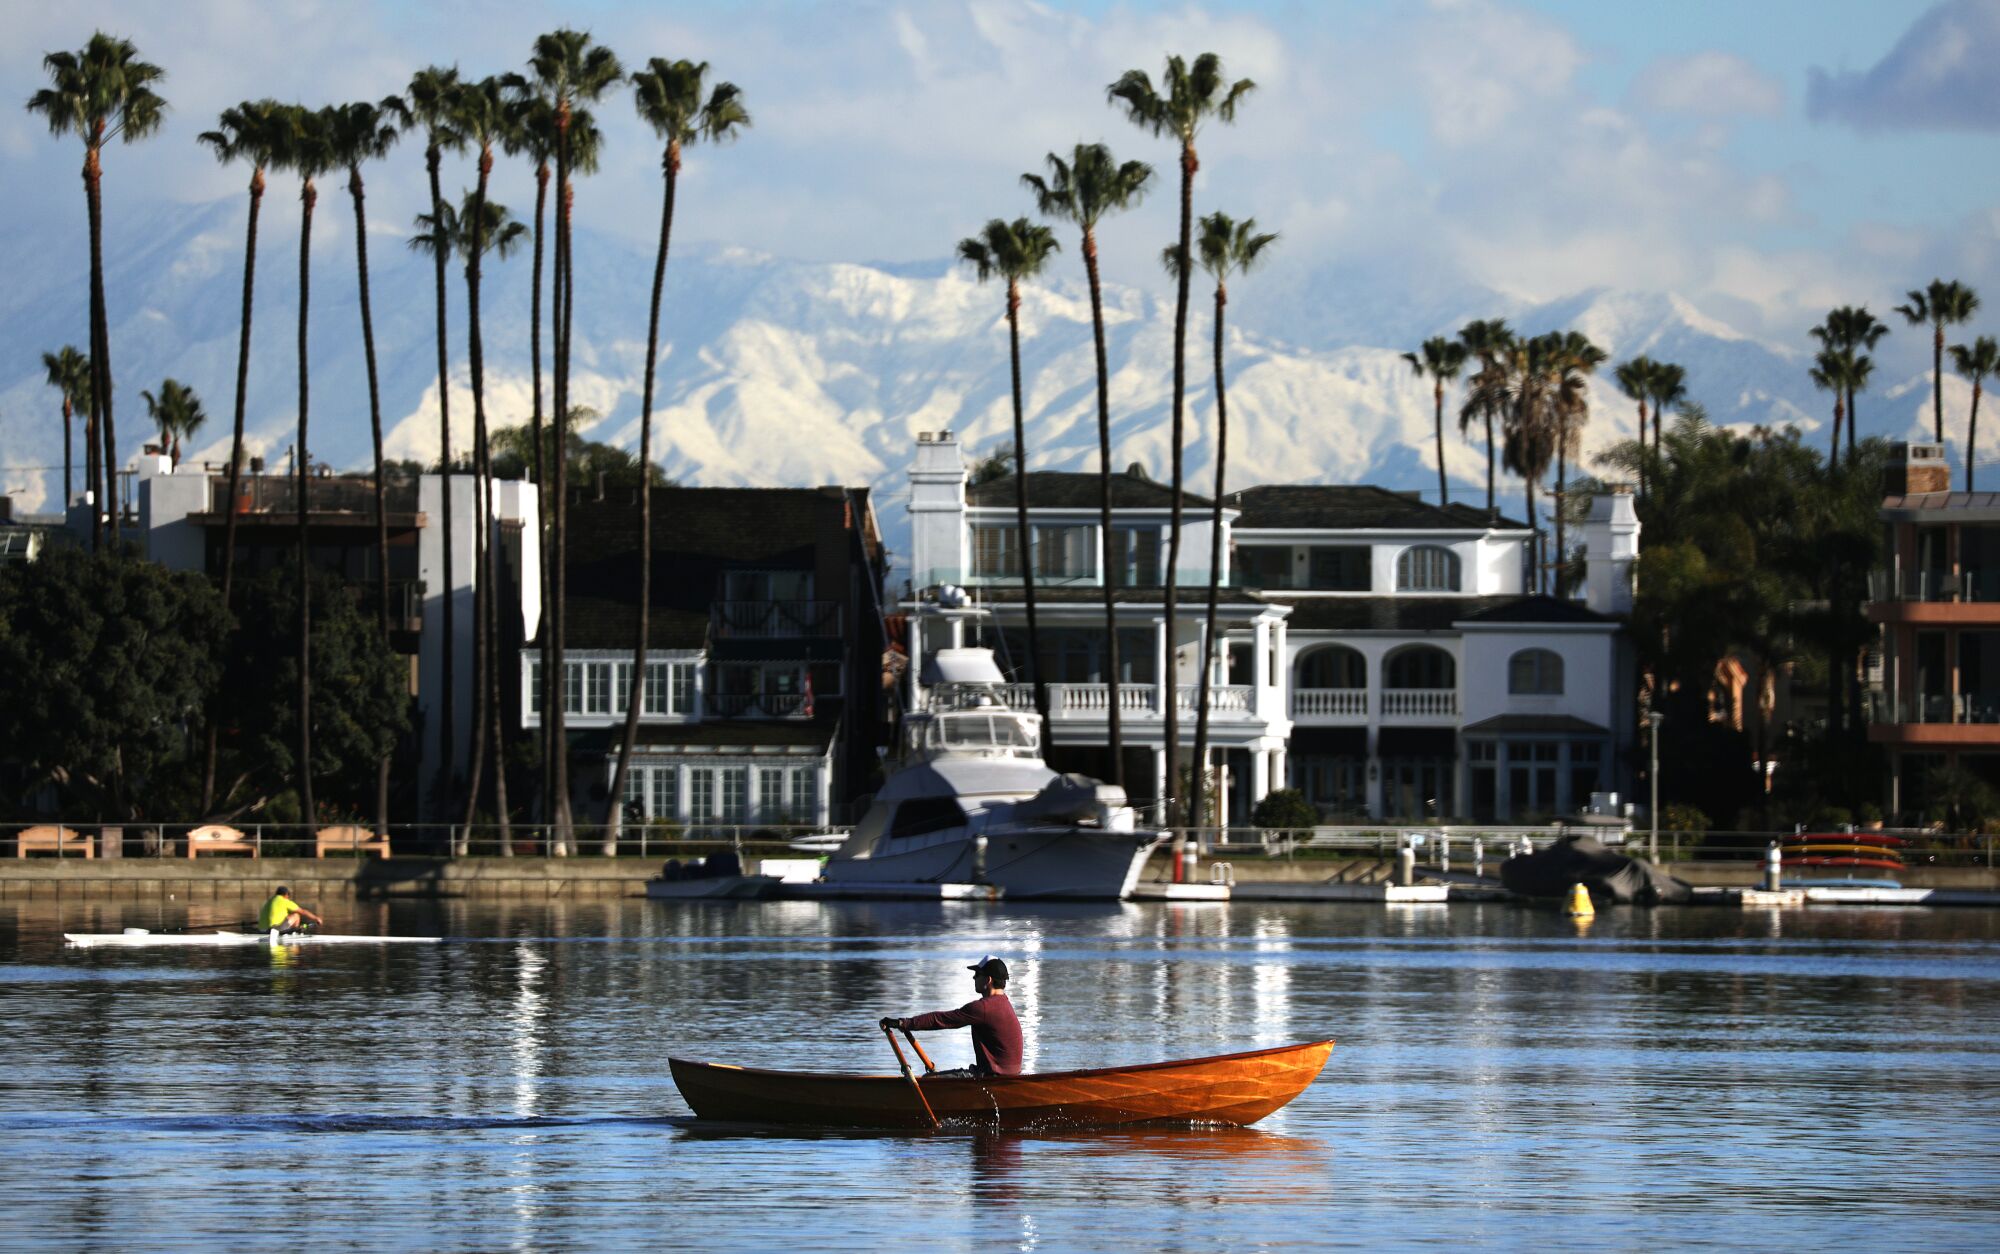 Michael Bauch rows his hand-built wooden rowboat with the snow-capped mountains within view of the Peninsula in Long Beach.